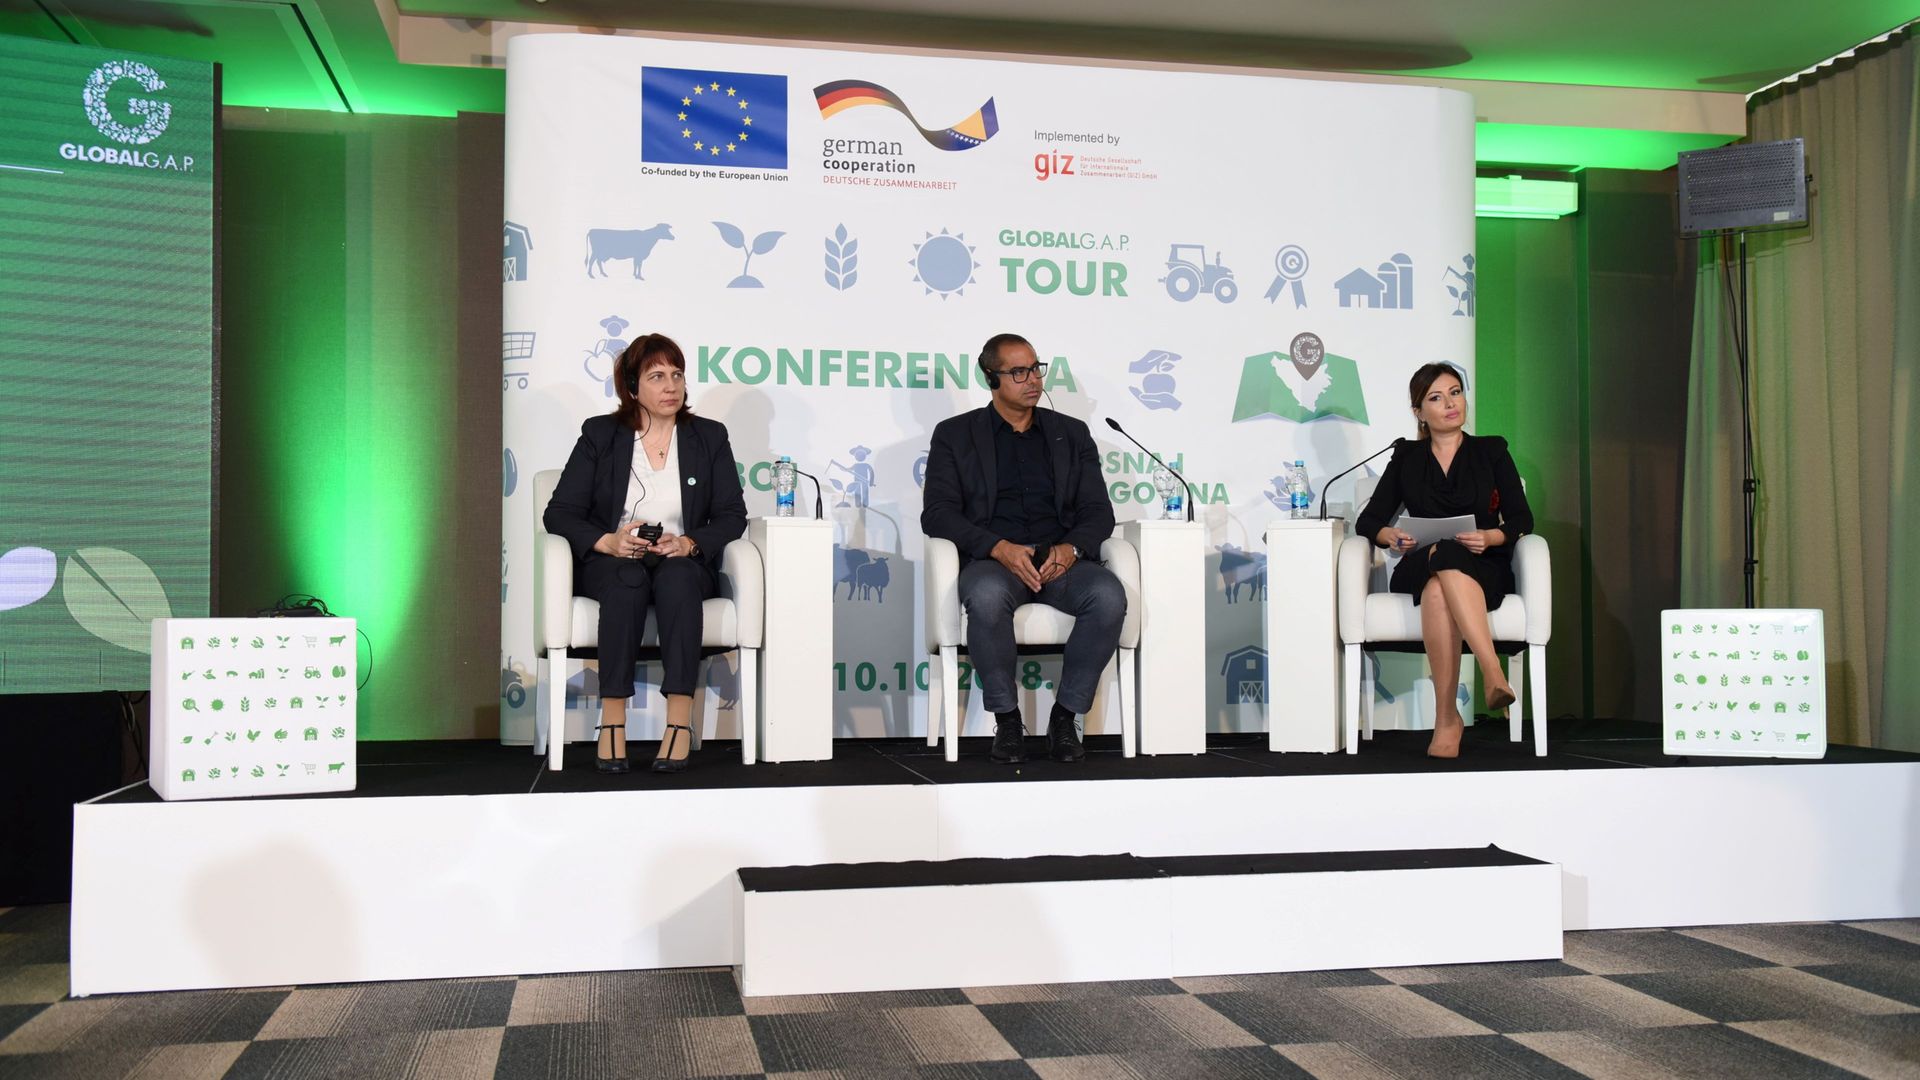 Image of presenters at the 2018 TOUR stop in Bosnia and Herzegovina 